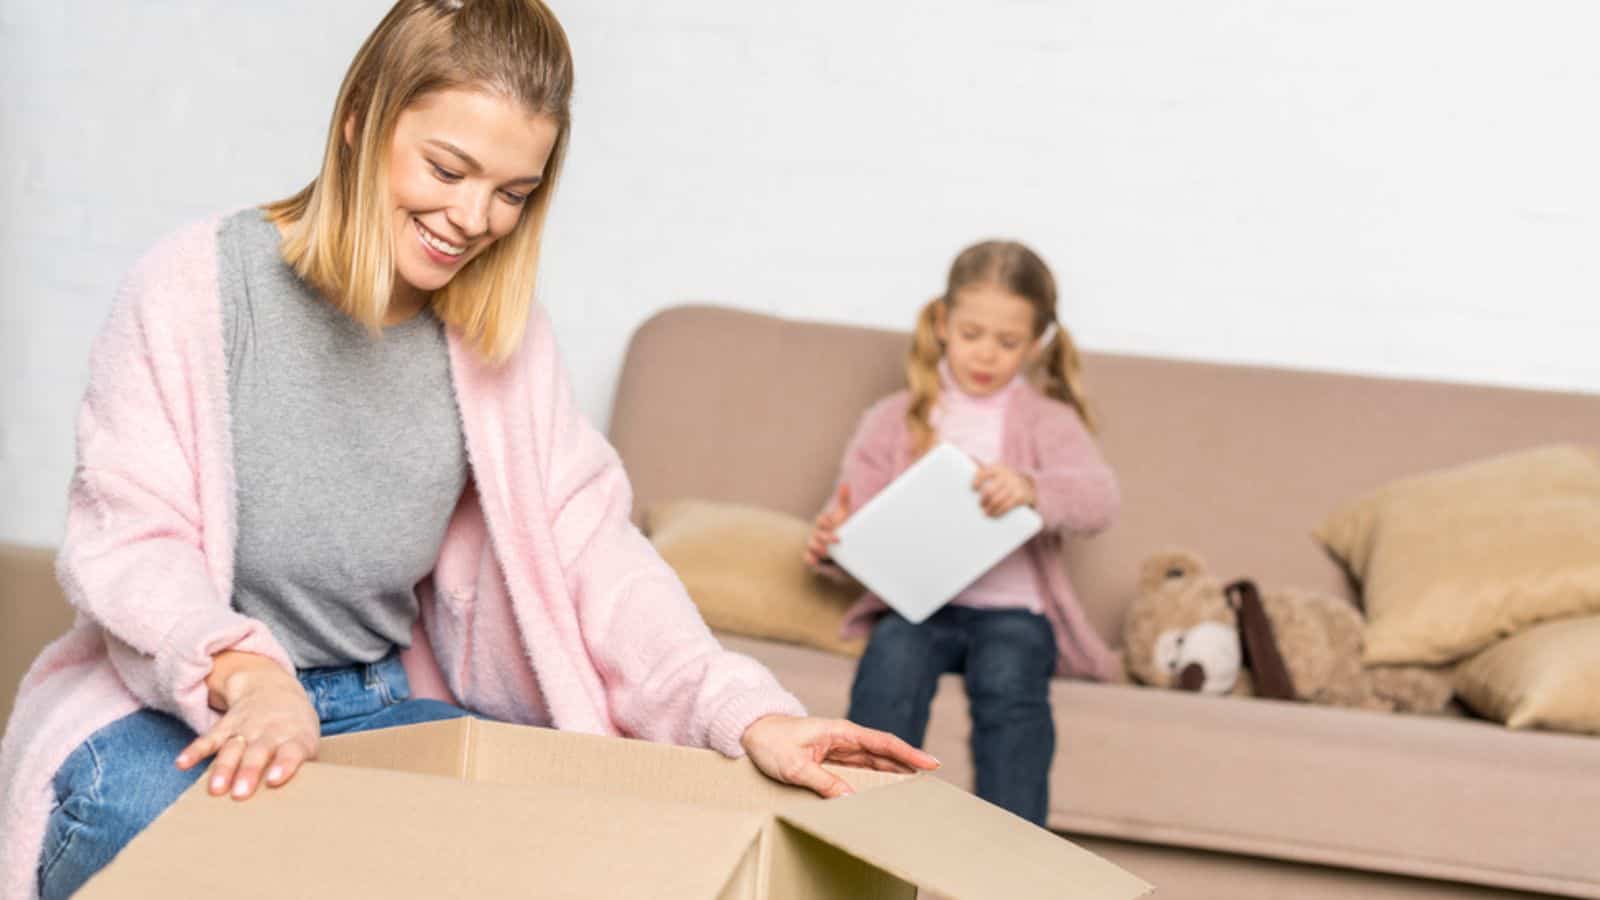 Smiling woman packing cardboard box while little daughter using digital